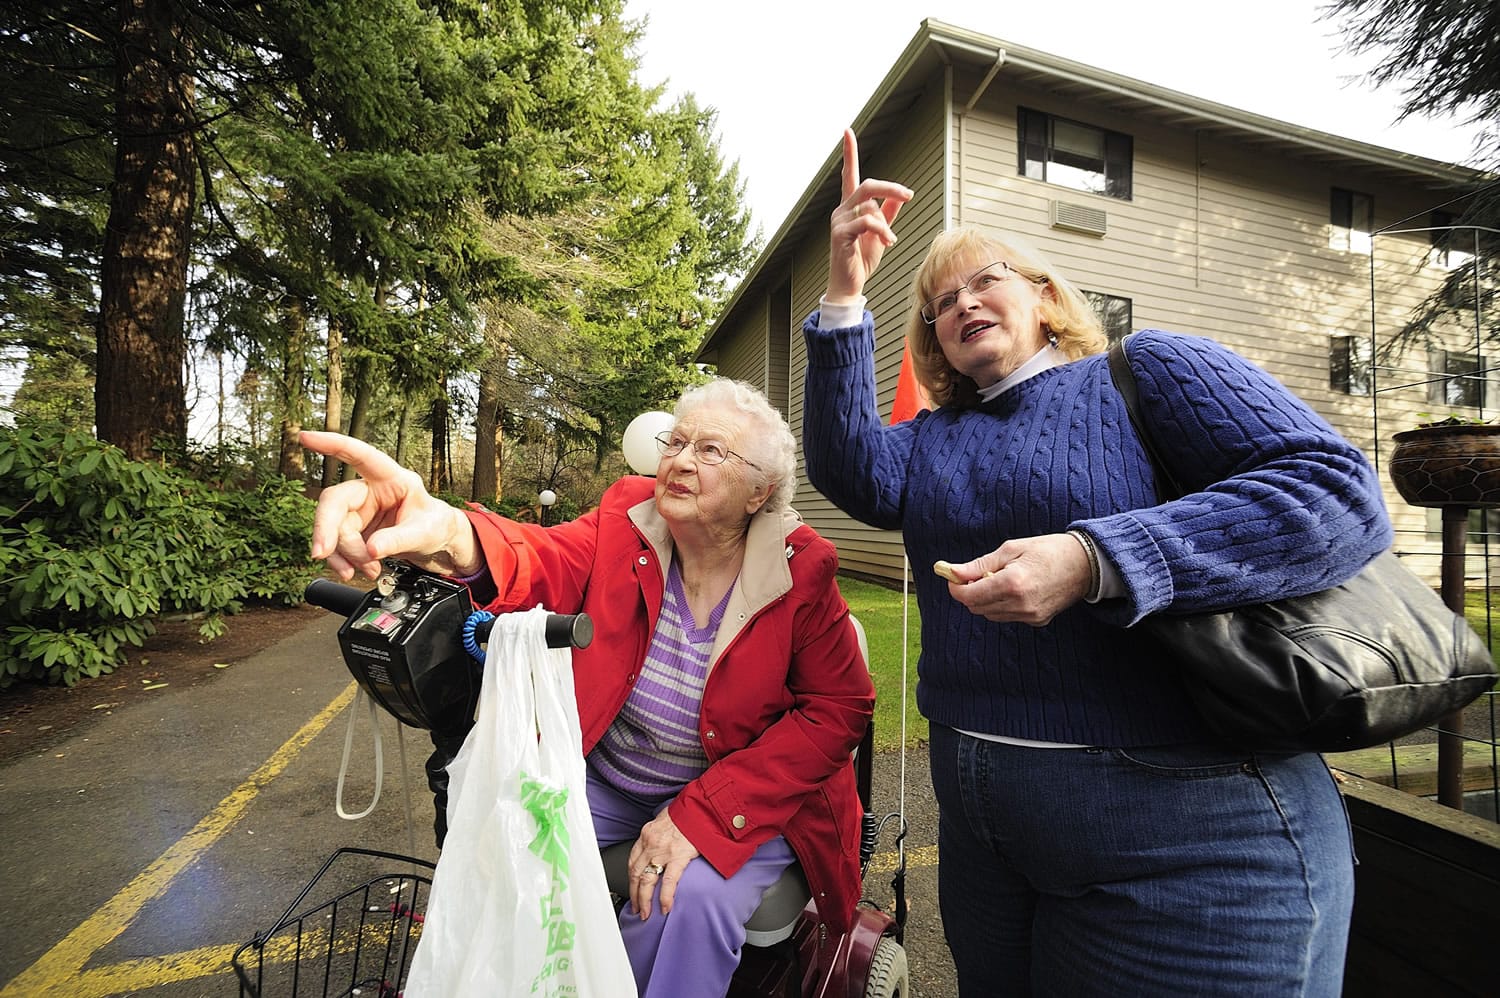 Pat Norby, right, and her mother, Jerry Sanford, 91, feed squirrels in a garden at Van Mall assisted living in Vancouver.